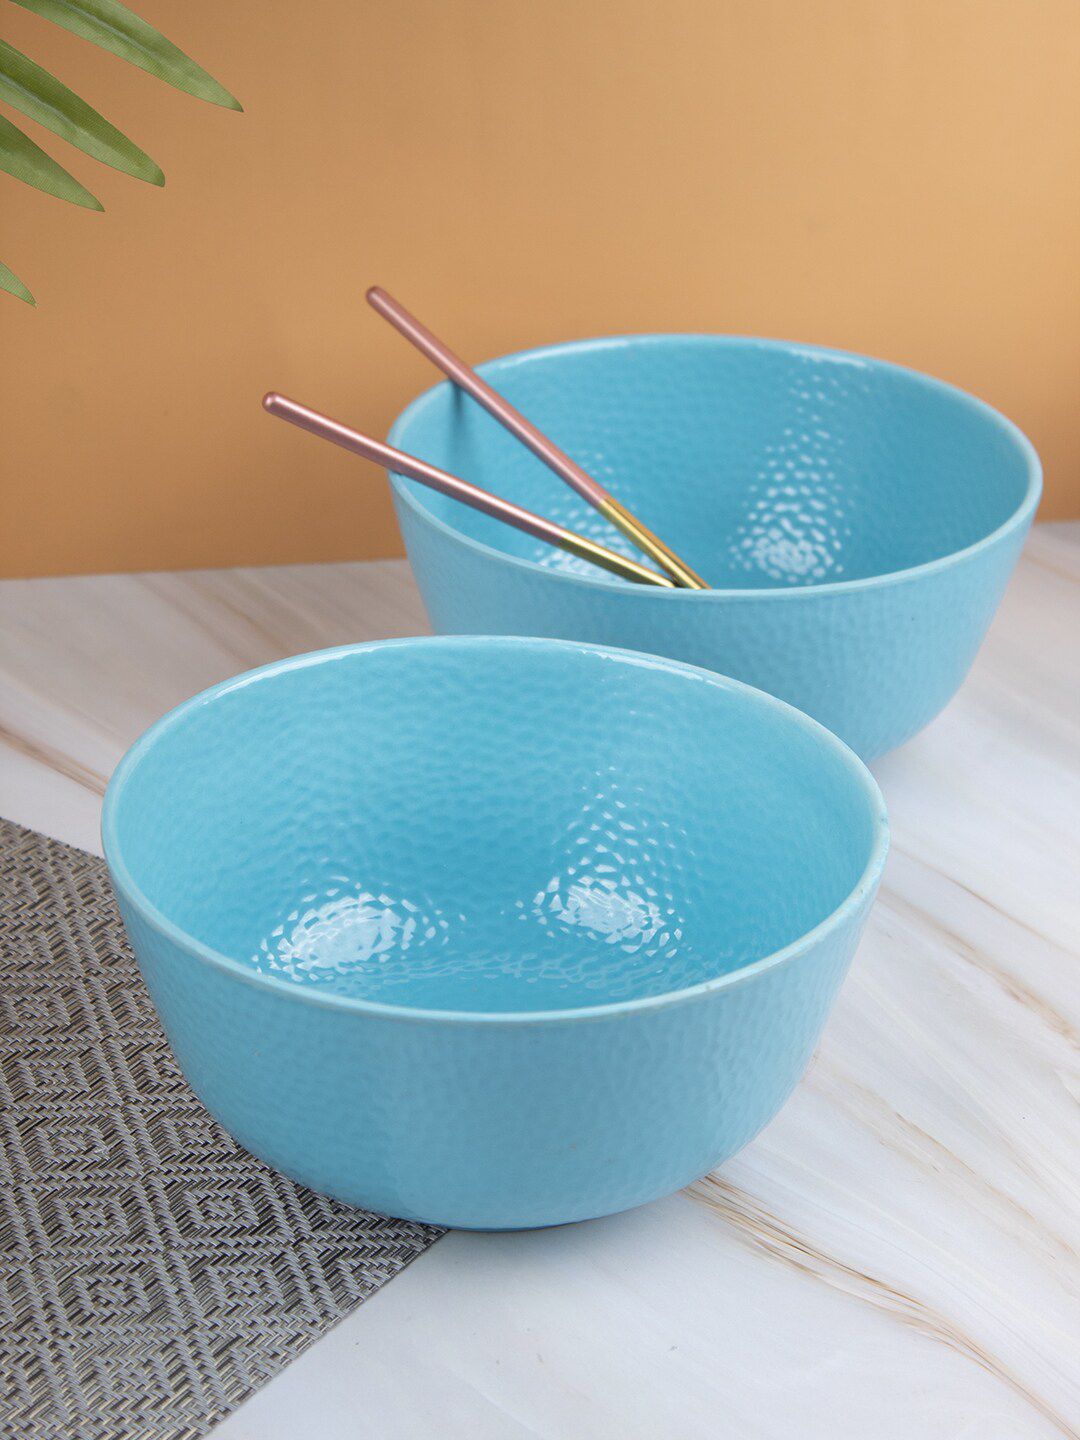 MARKET99 Turquoise Blue 2 Pieces Melamine Glossy Bowls Price in India